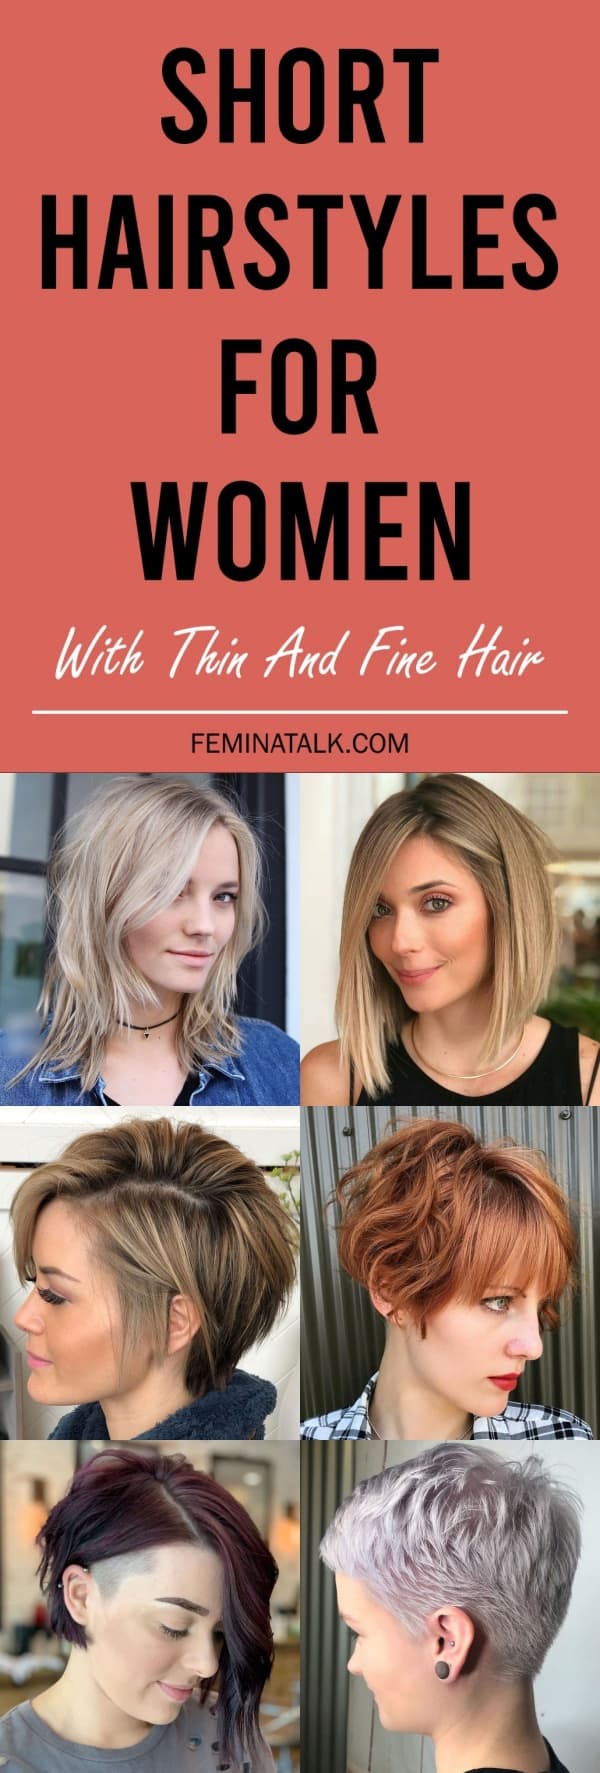 60 Best Short Hairstyles For Women With Thin And Fine Hair